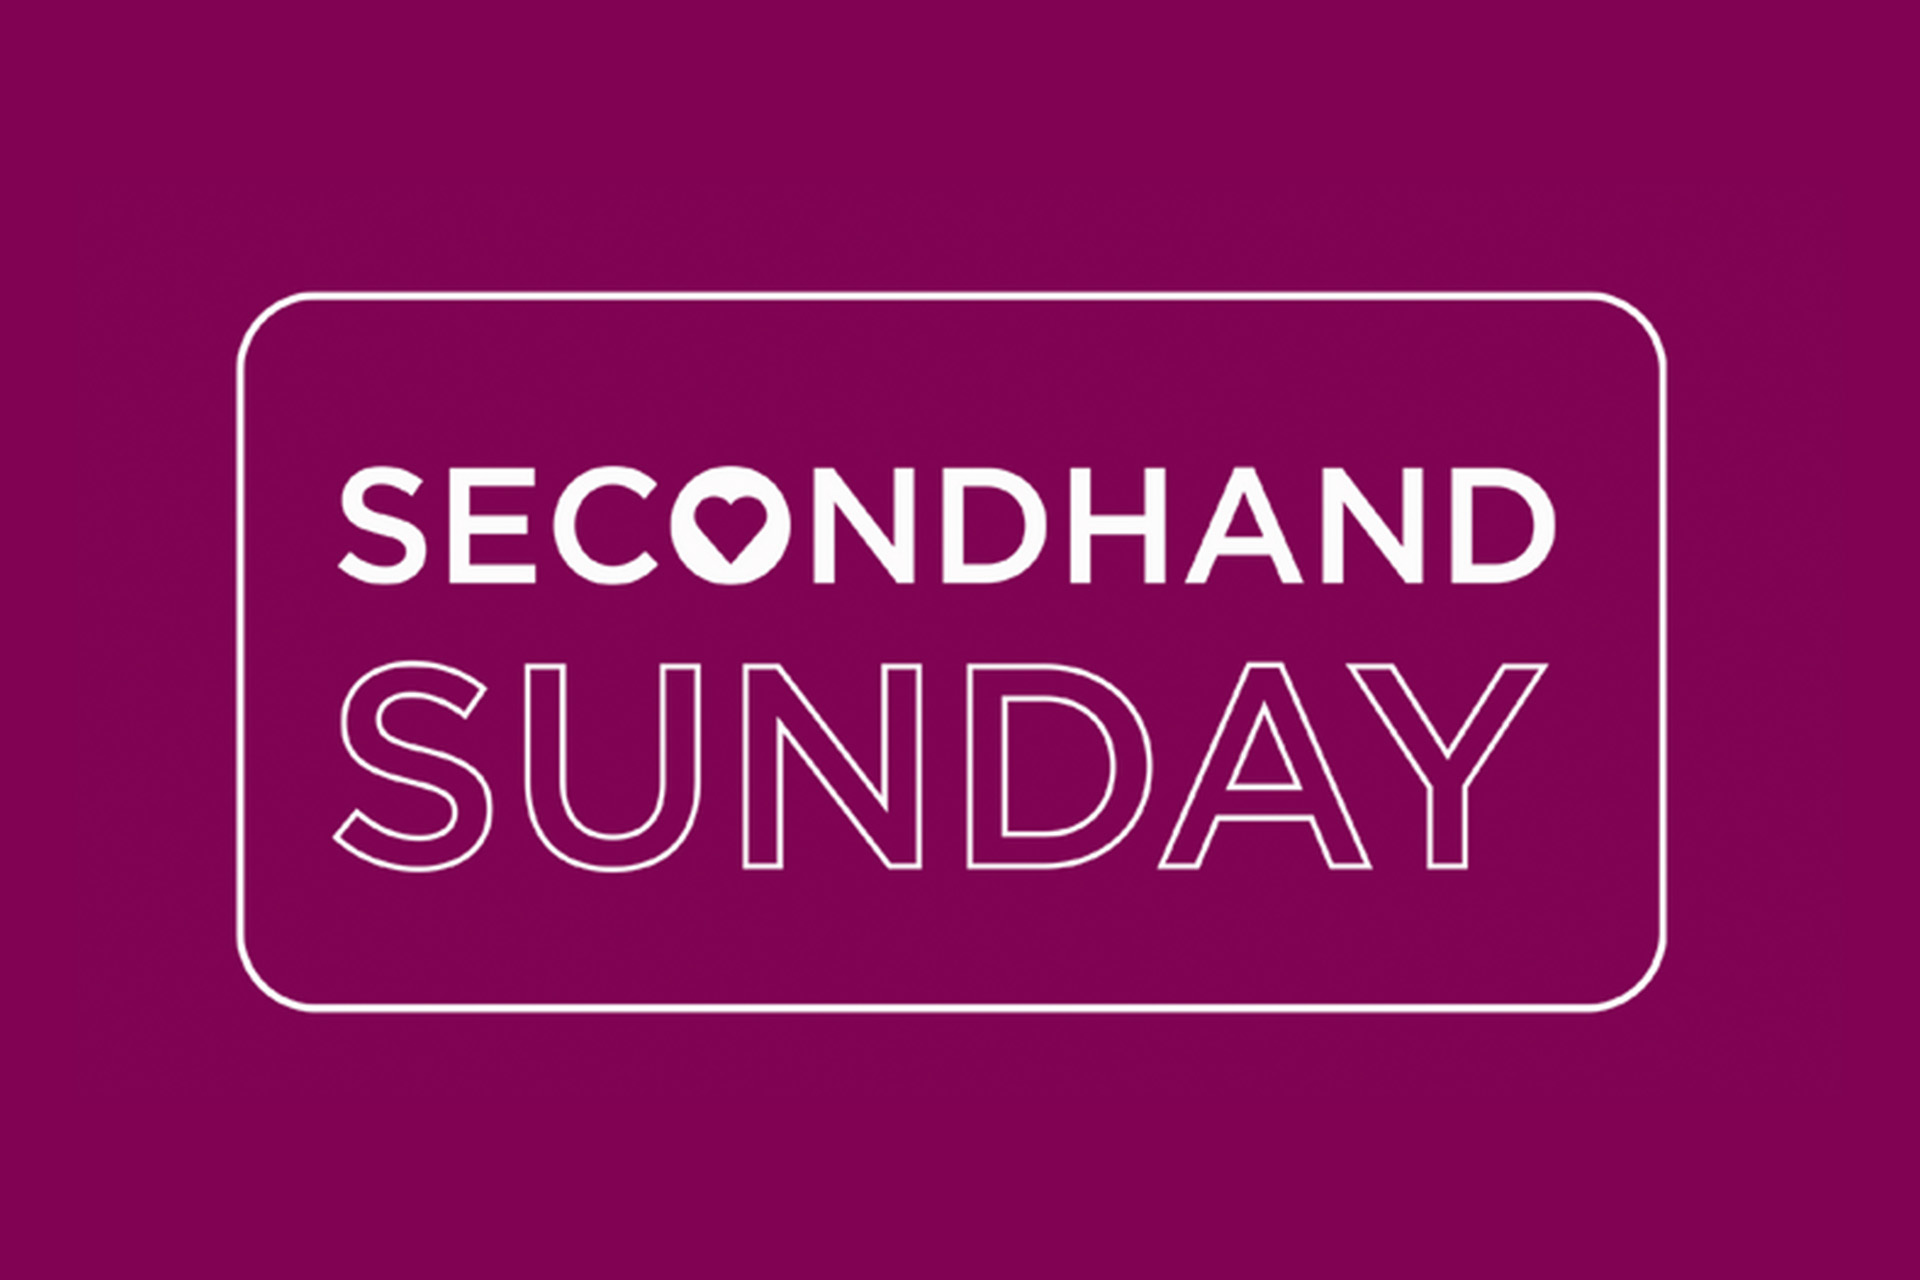 Poshmark Promoting Secondhand Purchasing for the Holidays | HomePage News